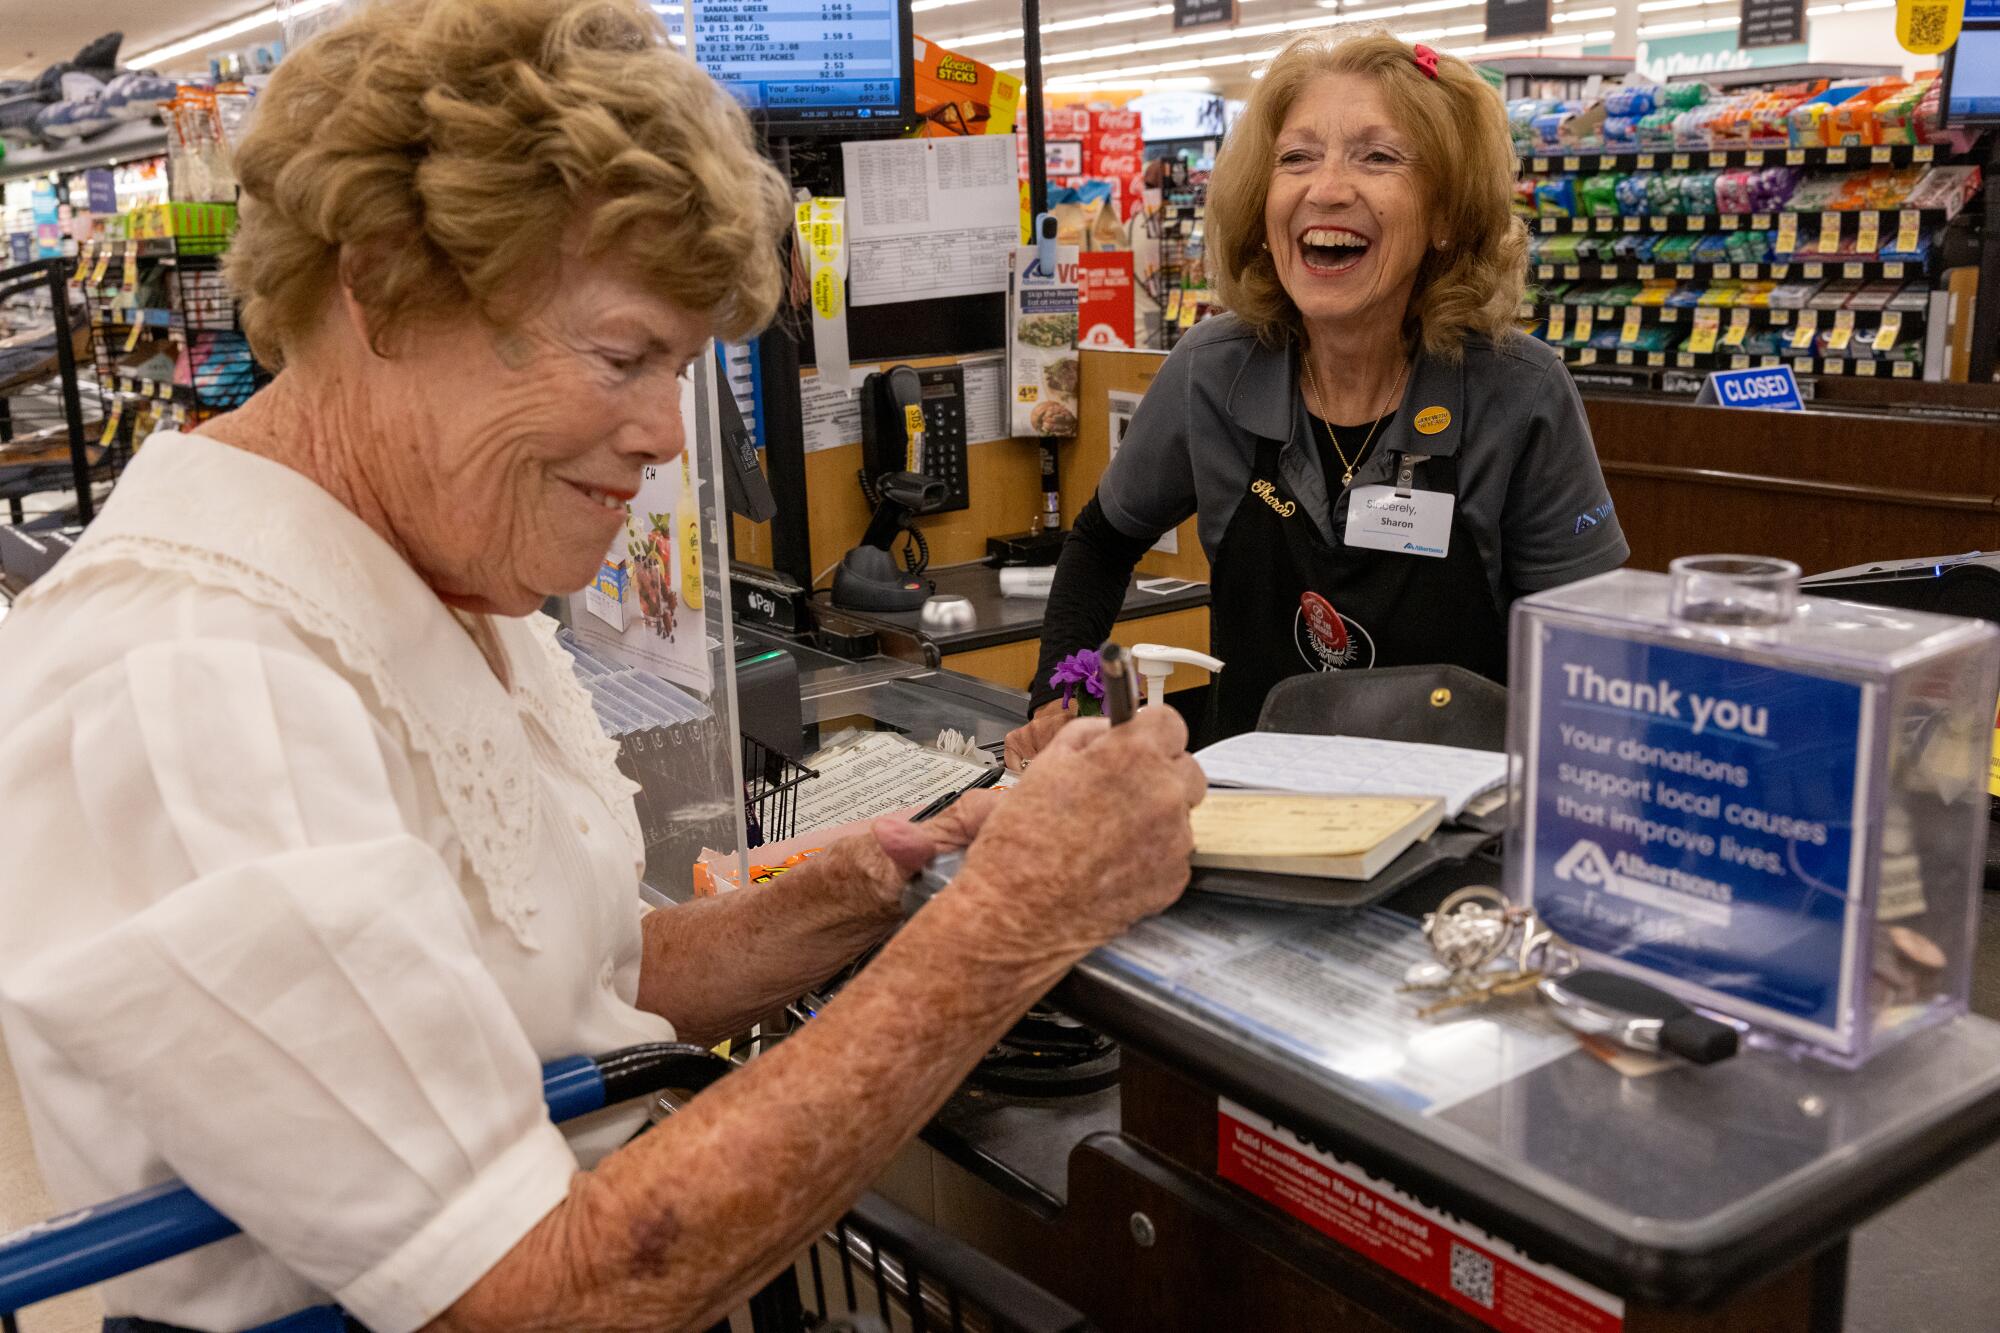 A woman writes a check at the supermarket and laughs with the cashier